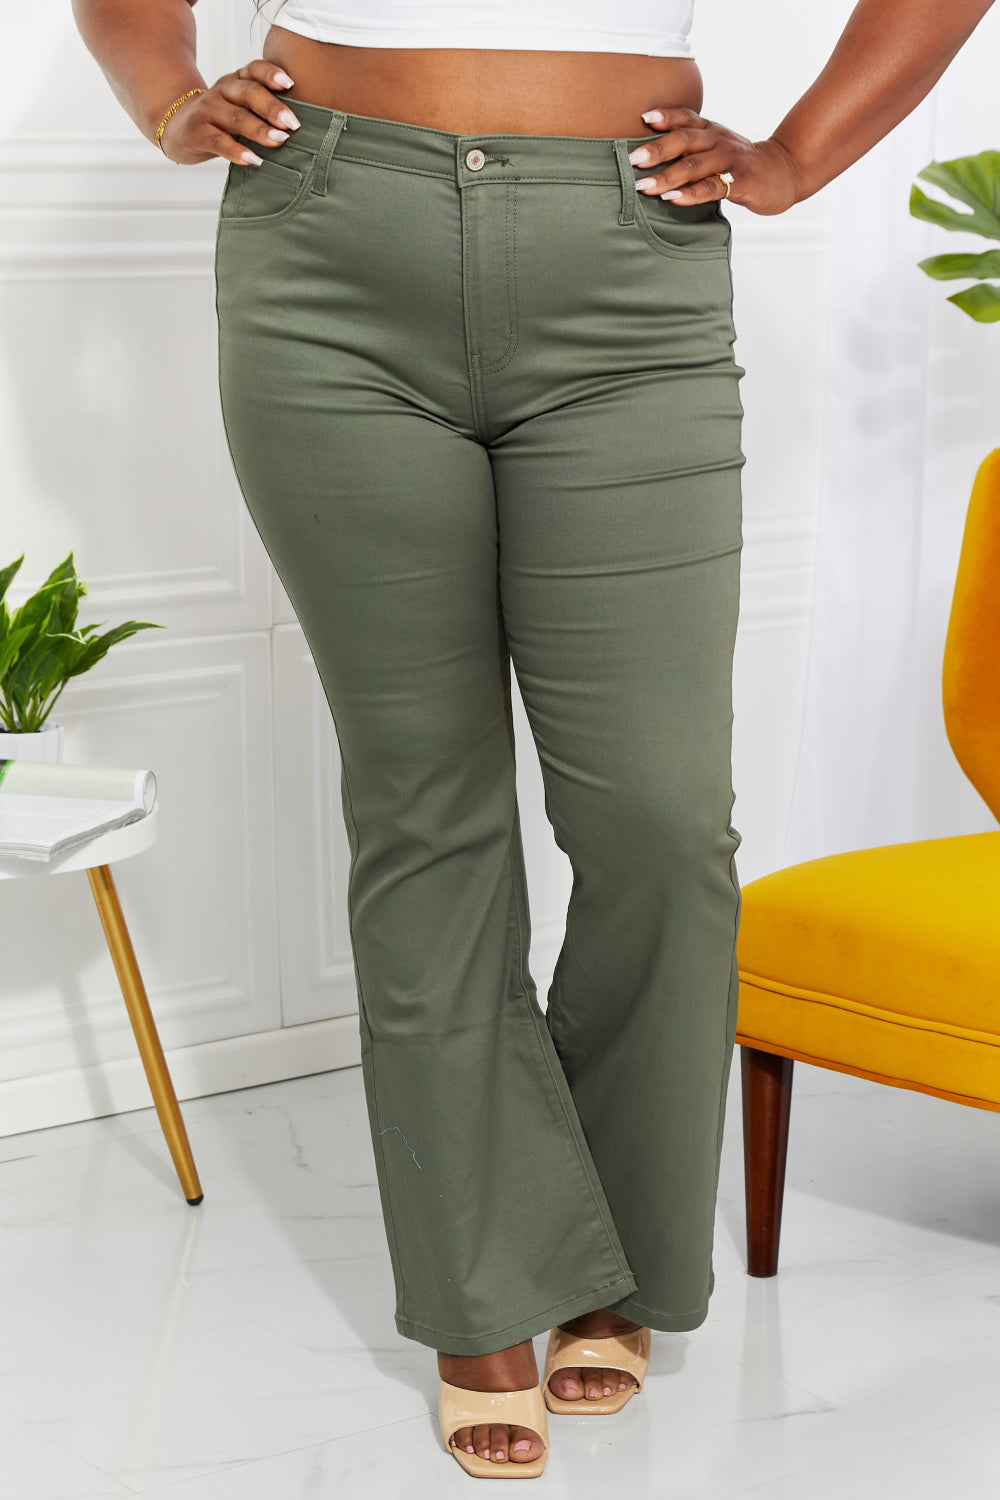 Clementine High-Rise Bootcut Jeans in Olive-Modish Lily, Tecumseh Michigan